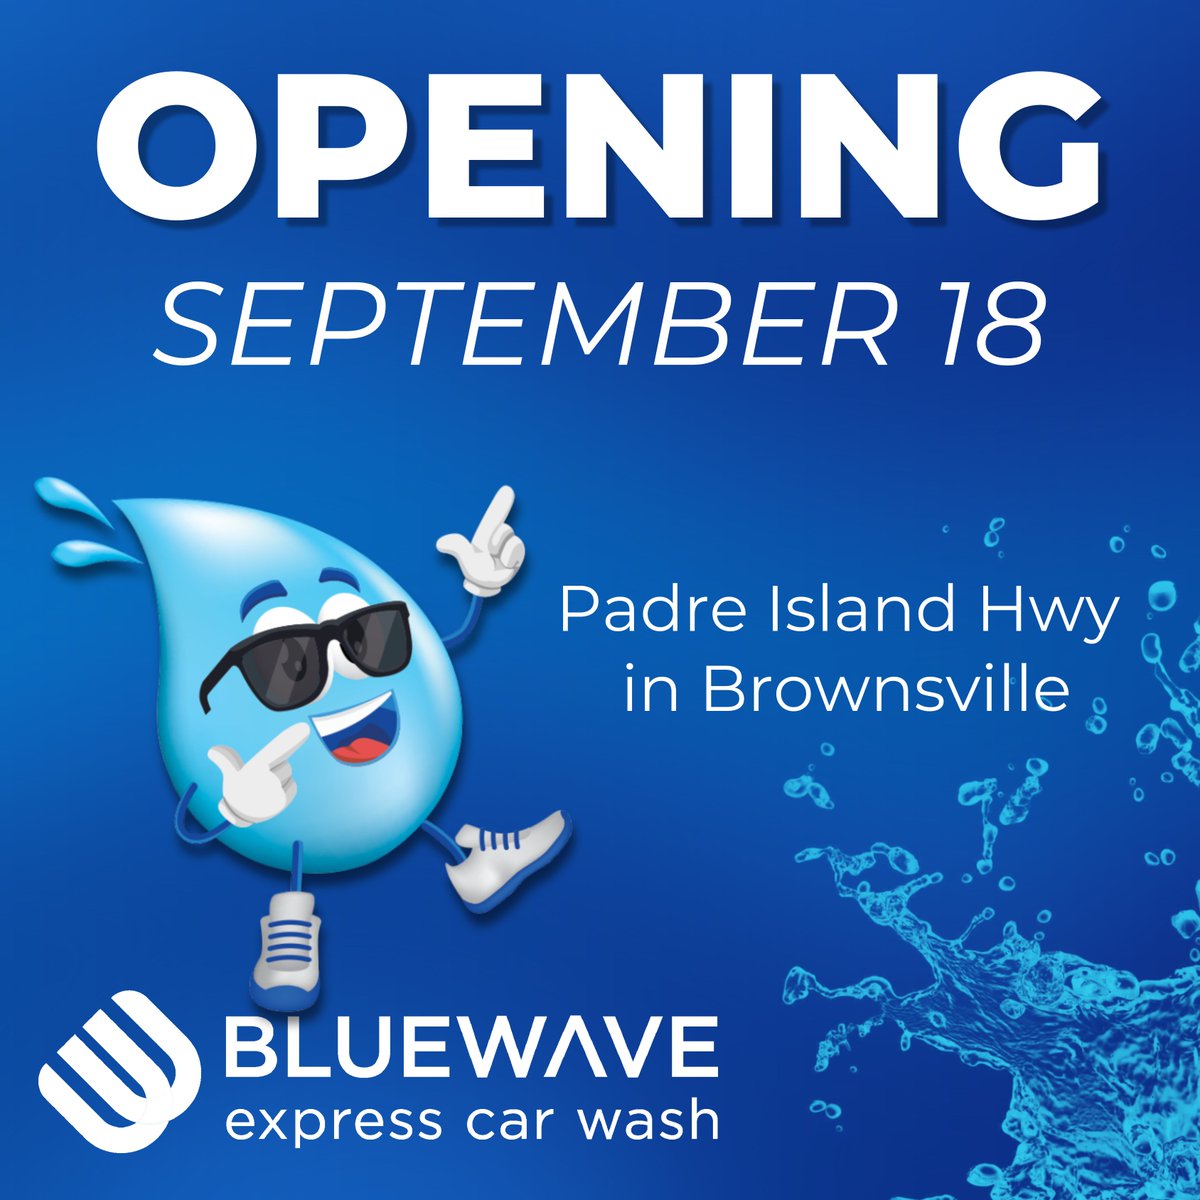 Get read to have your car washed! This September 18 our newest #BlueWaveExpress location will open in #BrownsvilleTX on E Padre Island Hwy at 7A!
Follow our page for upcoming updates for #grandopening discounts and promotions!
bluewaveexpress.com
#carwash #unlimitedwashes